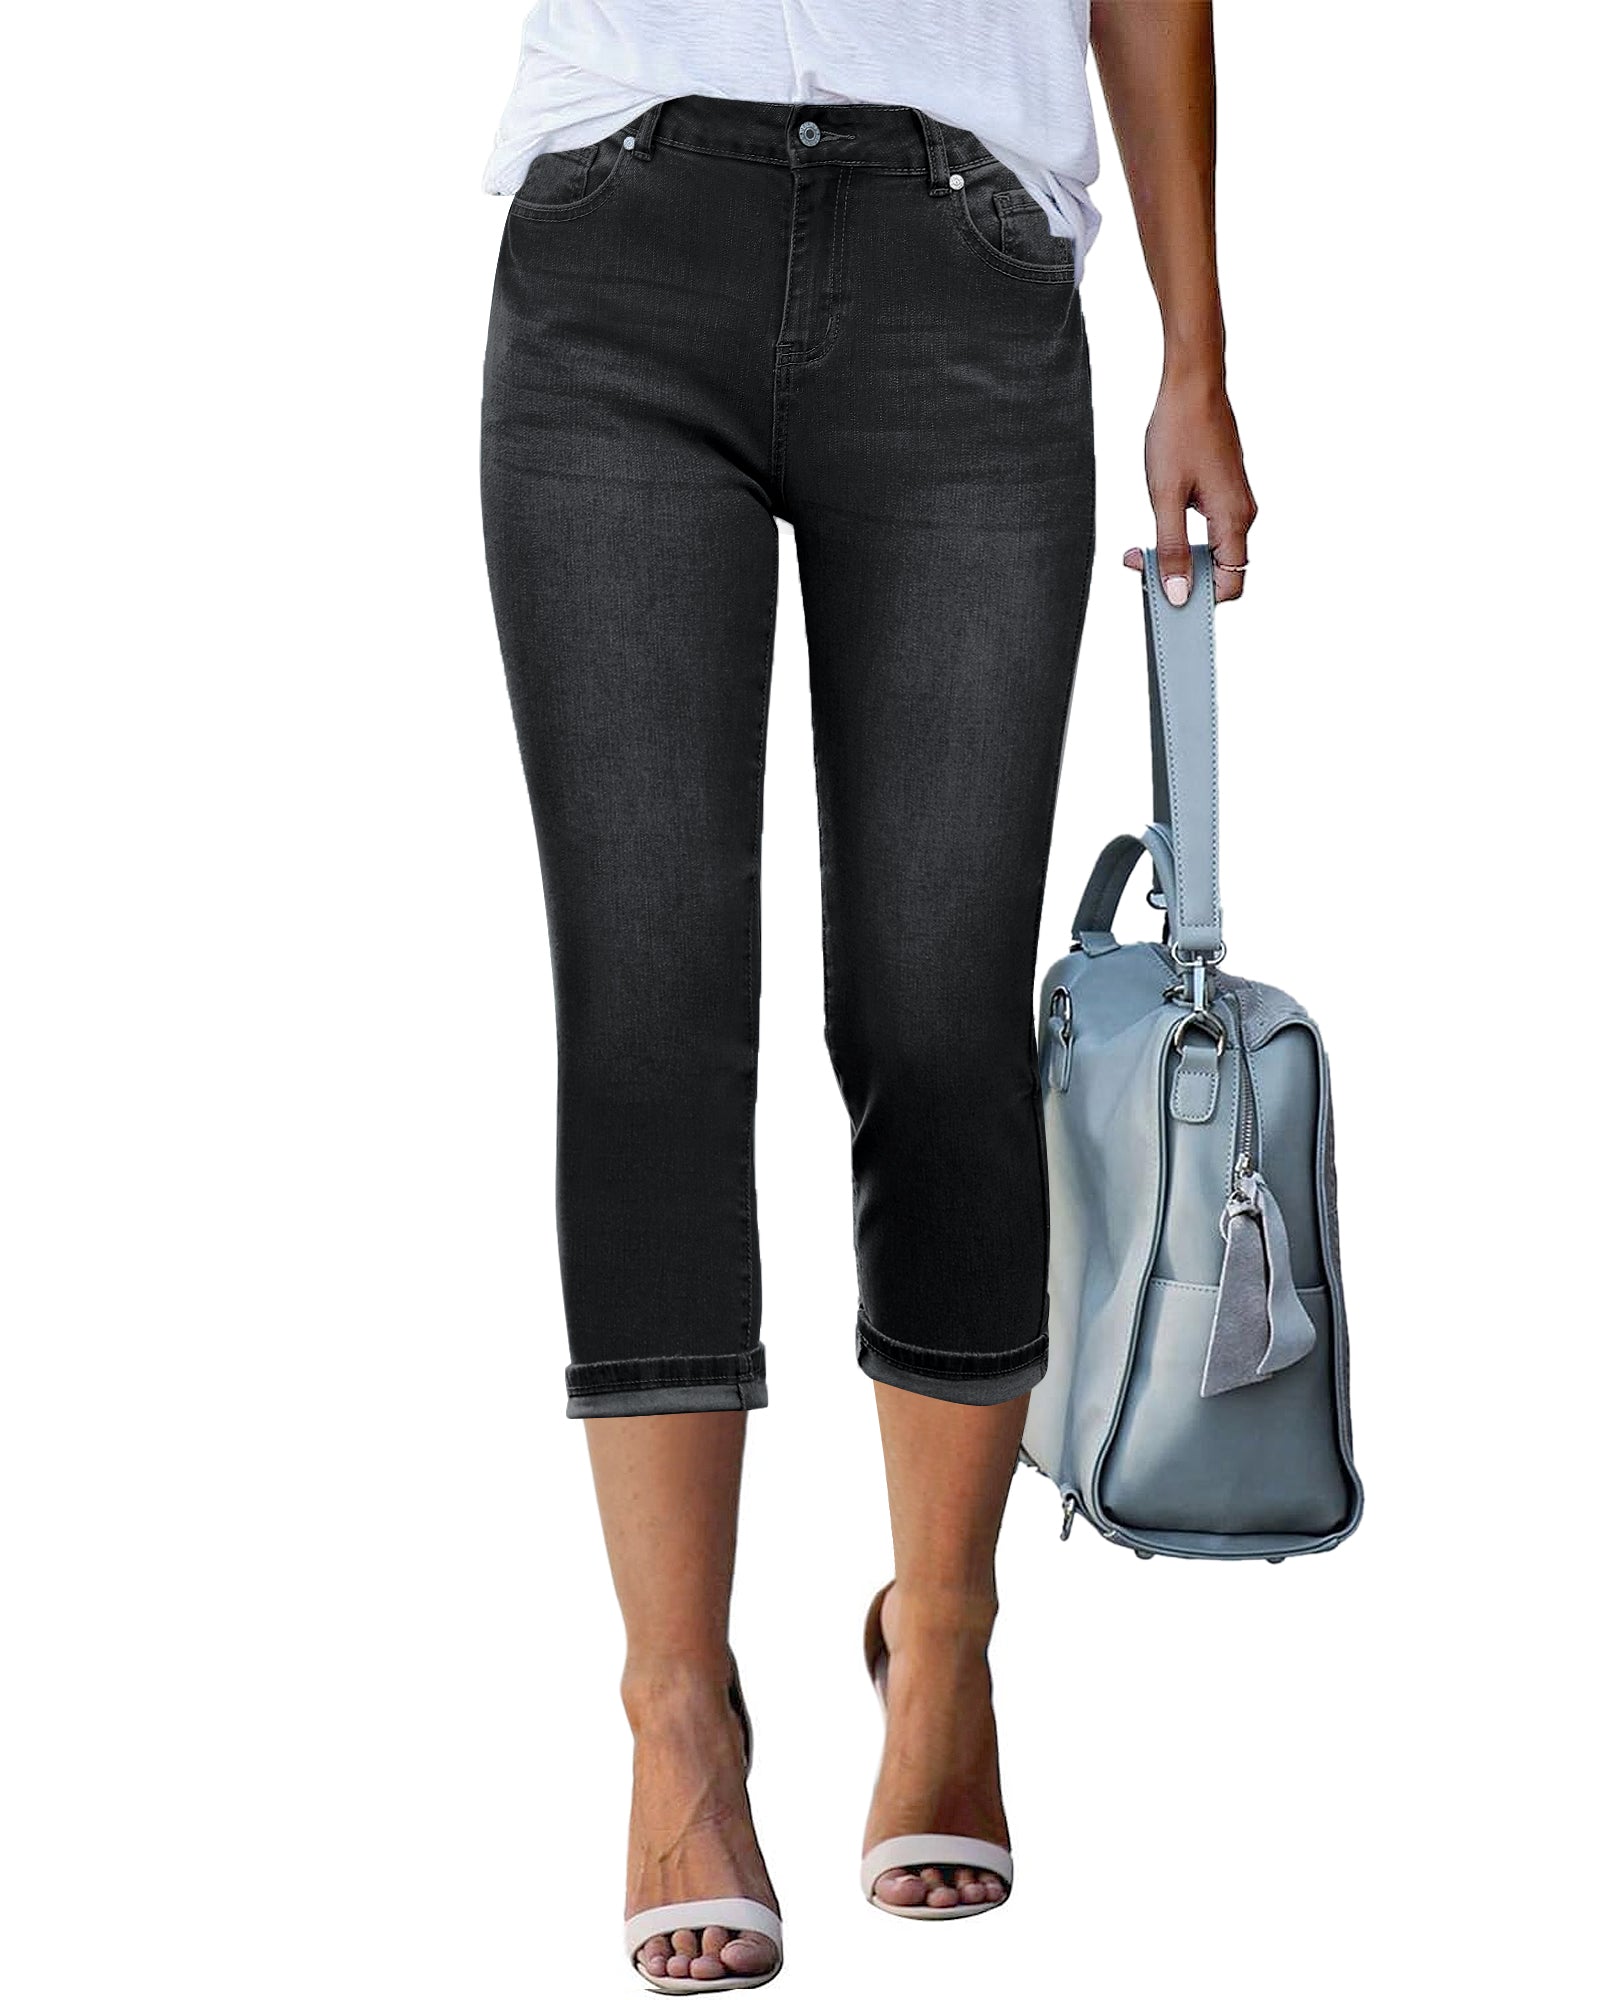 Avox Capri Jeans - Get Best Price from Manufacturers & Suppliers in India